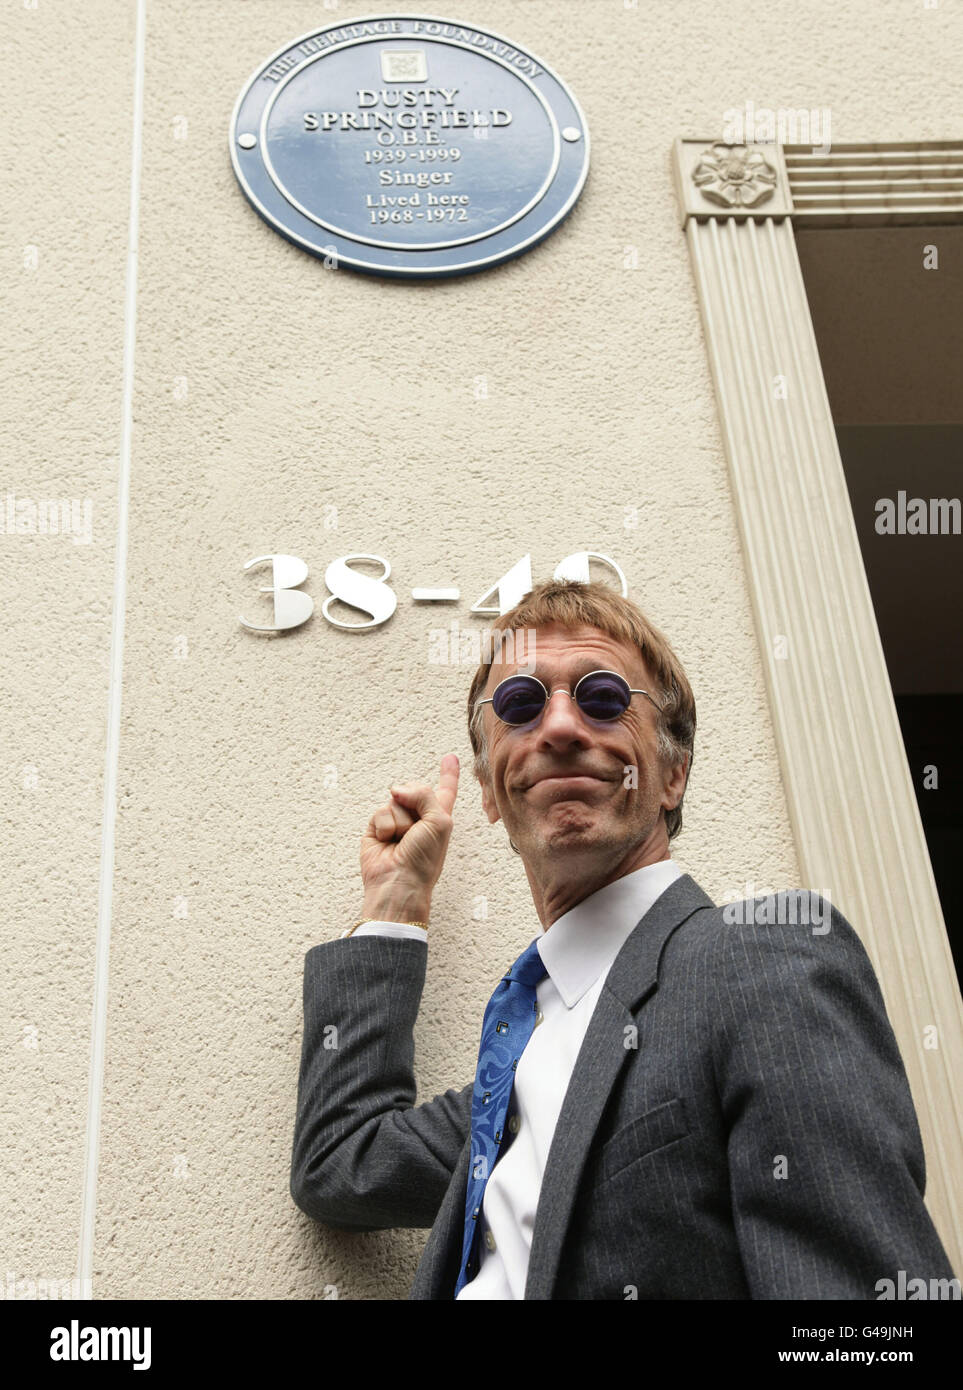 Bee Gees star Robin Gibb attending the unveiling of a Heritage Foundation blue plaque at a former home of Dusty Springfield, at 38-40 Aubrey Walk in Kensington, London. Stock Photo